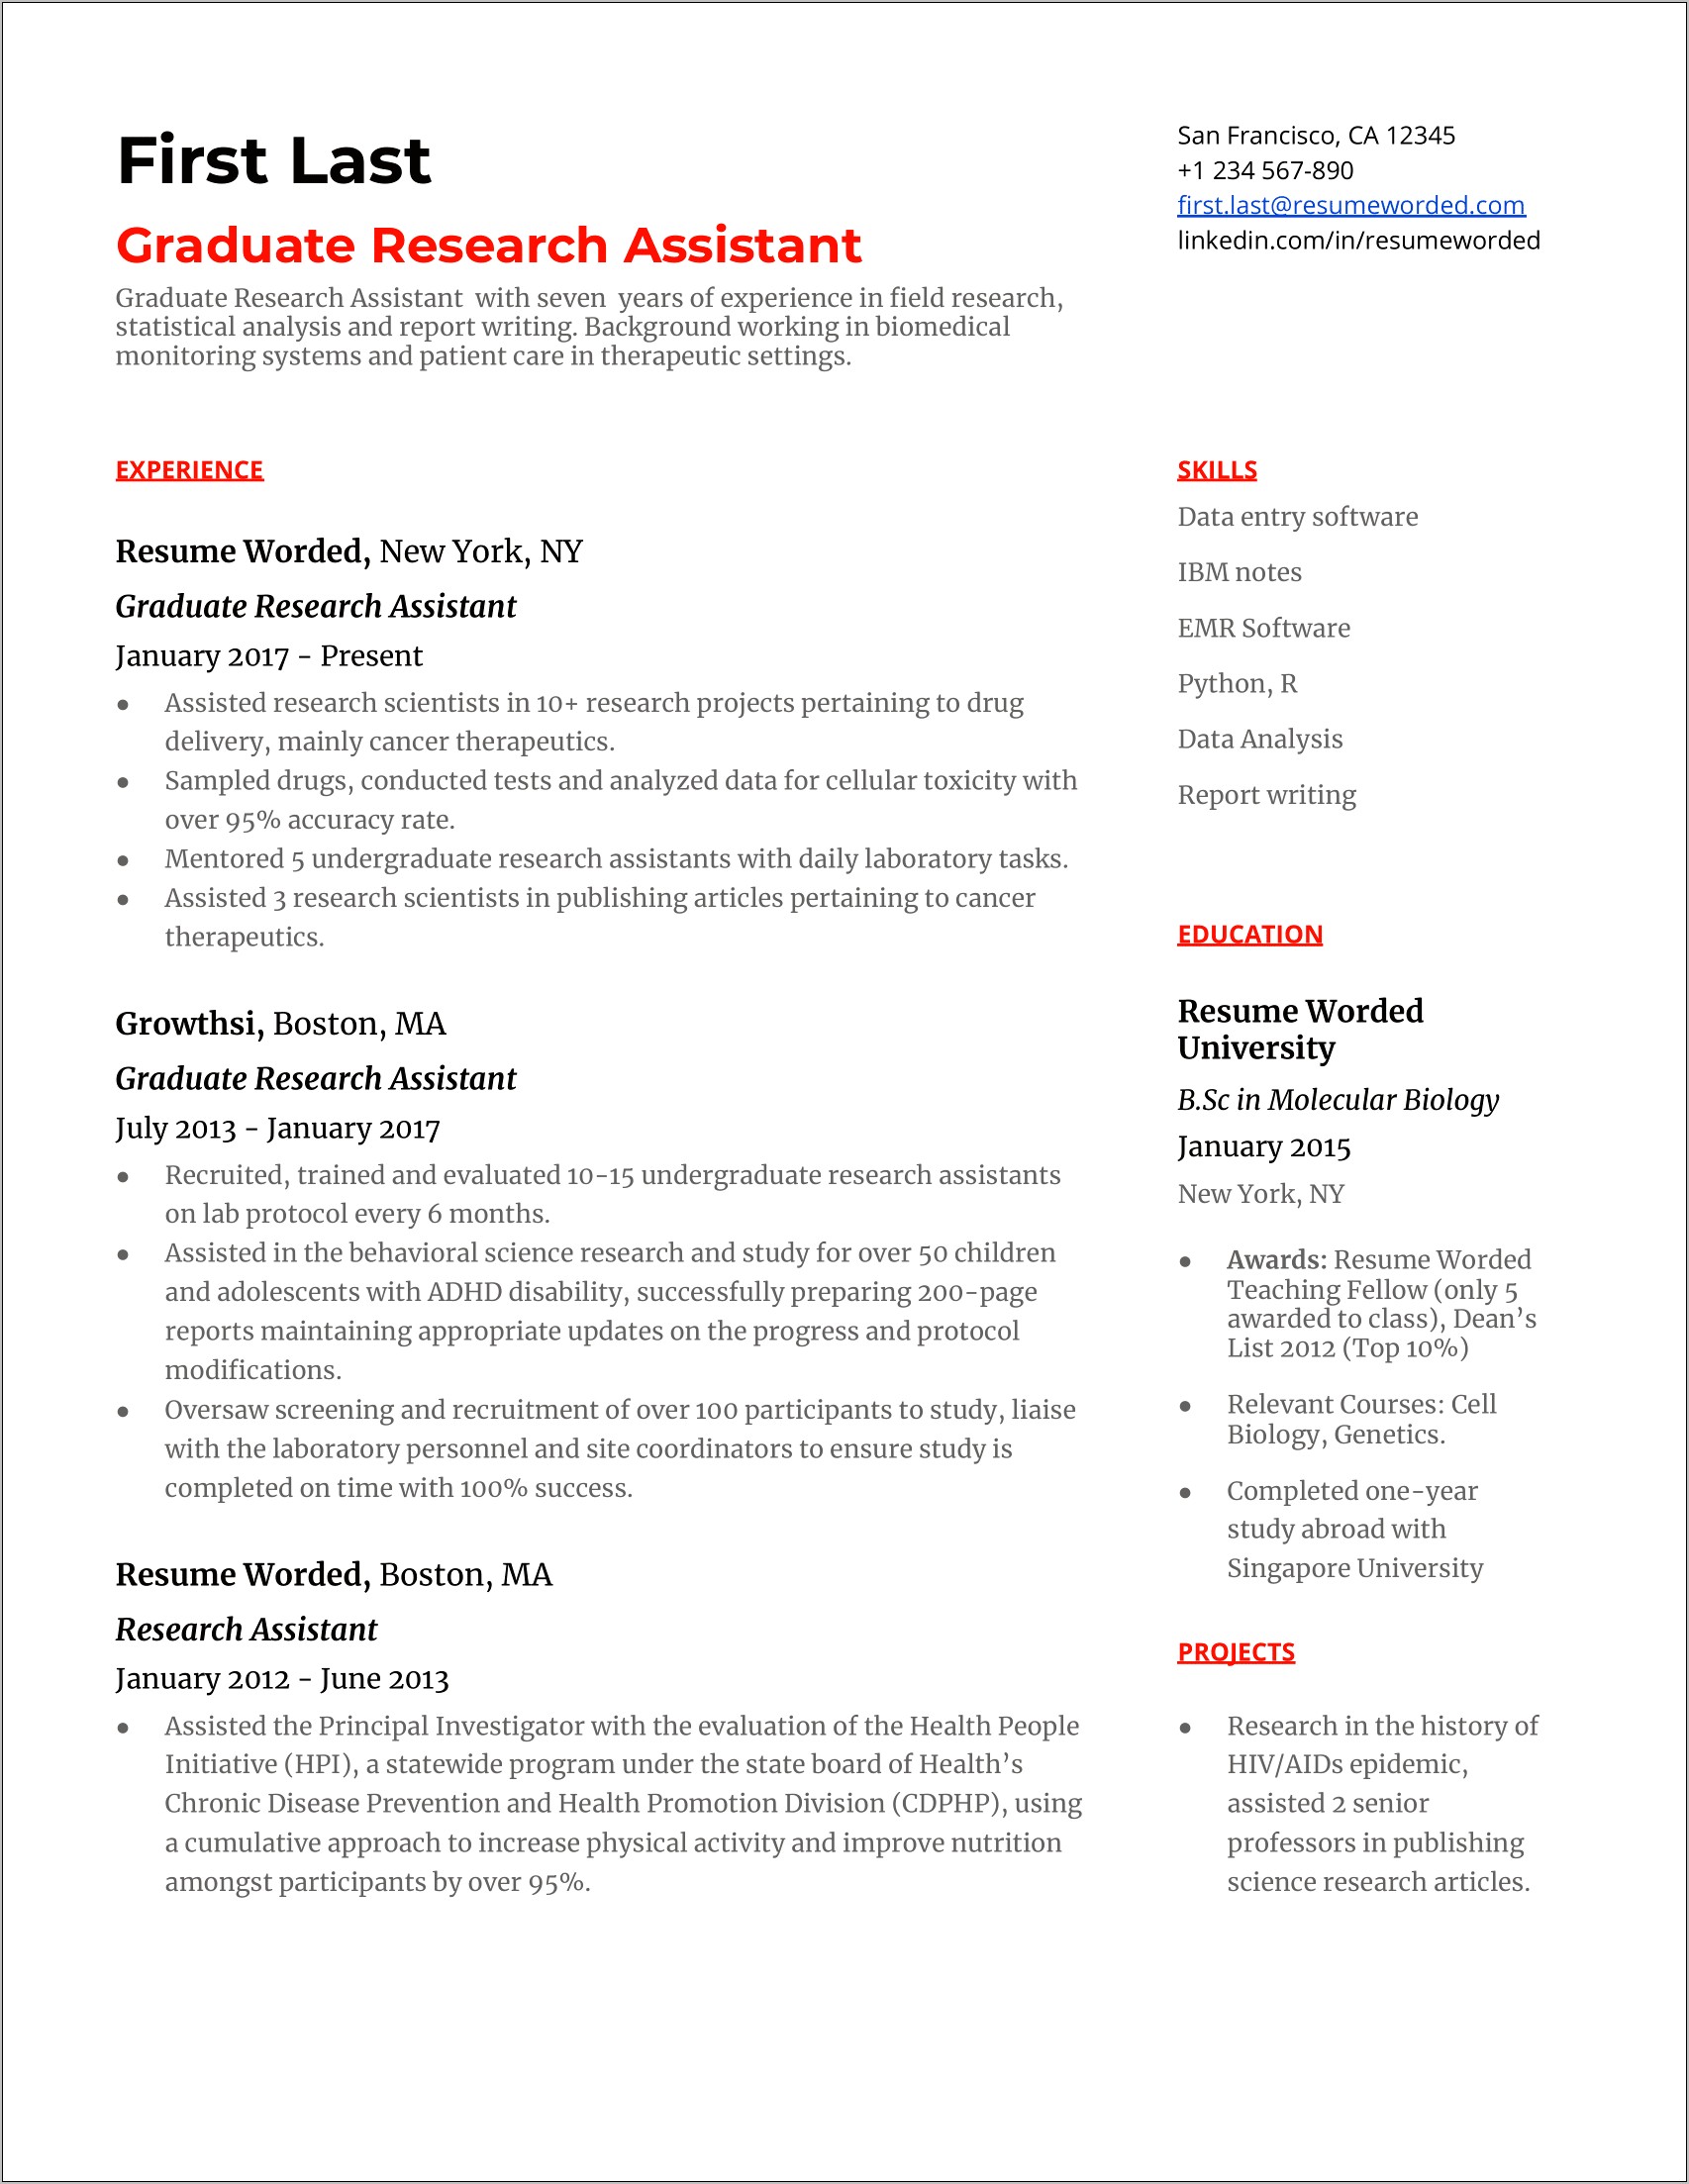 Resume Example For Undergraduate Research